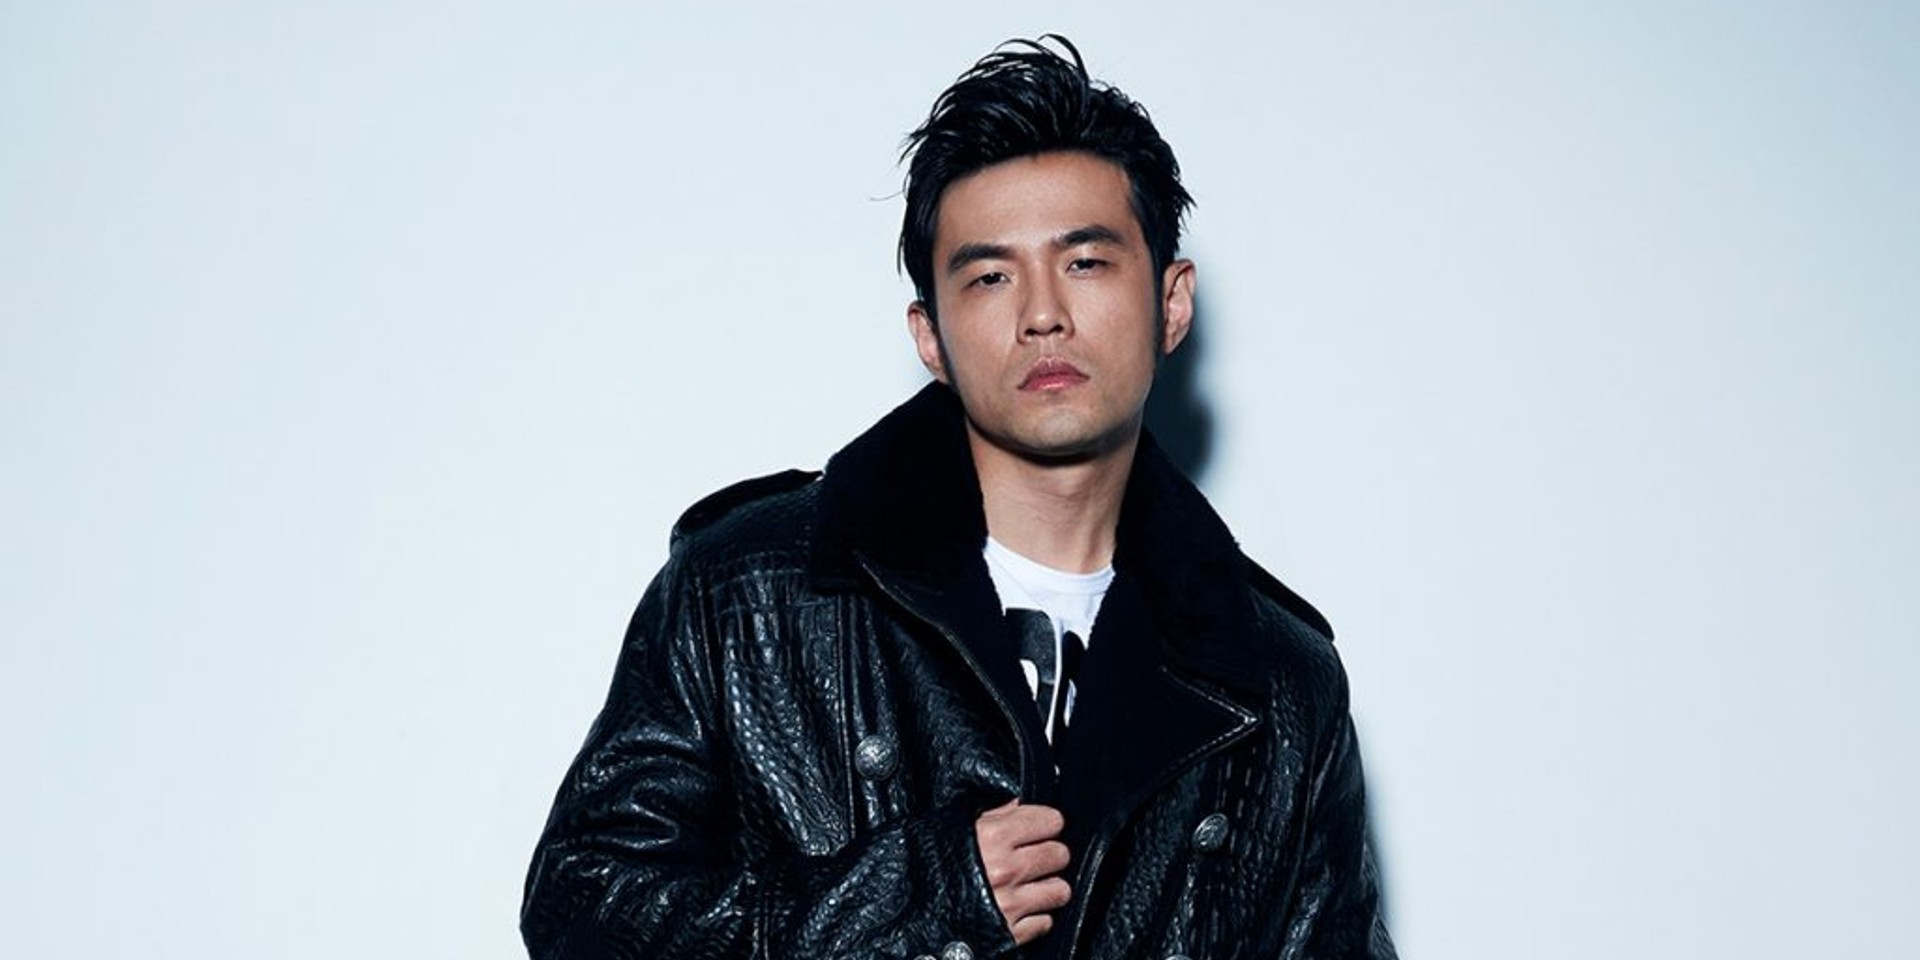 Jay Chou returns to youthful themes with new single on 39th birthday